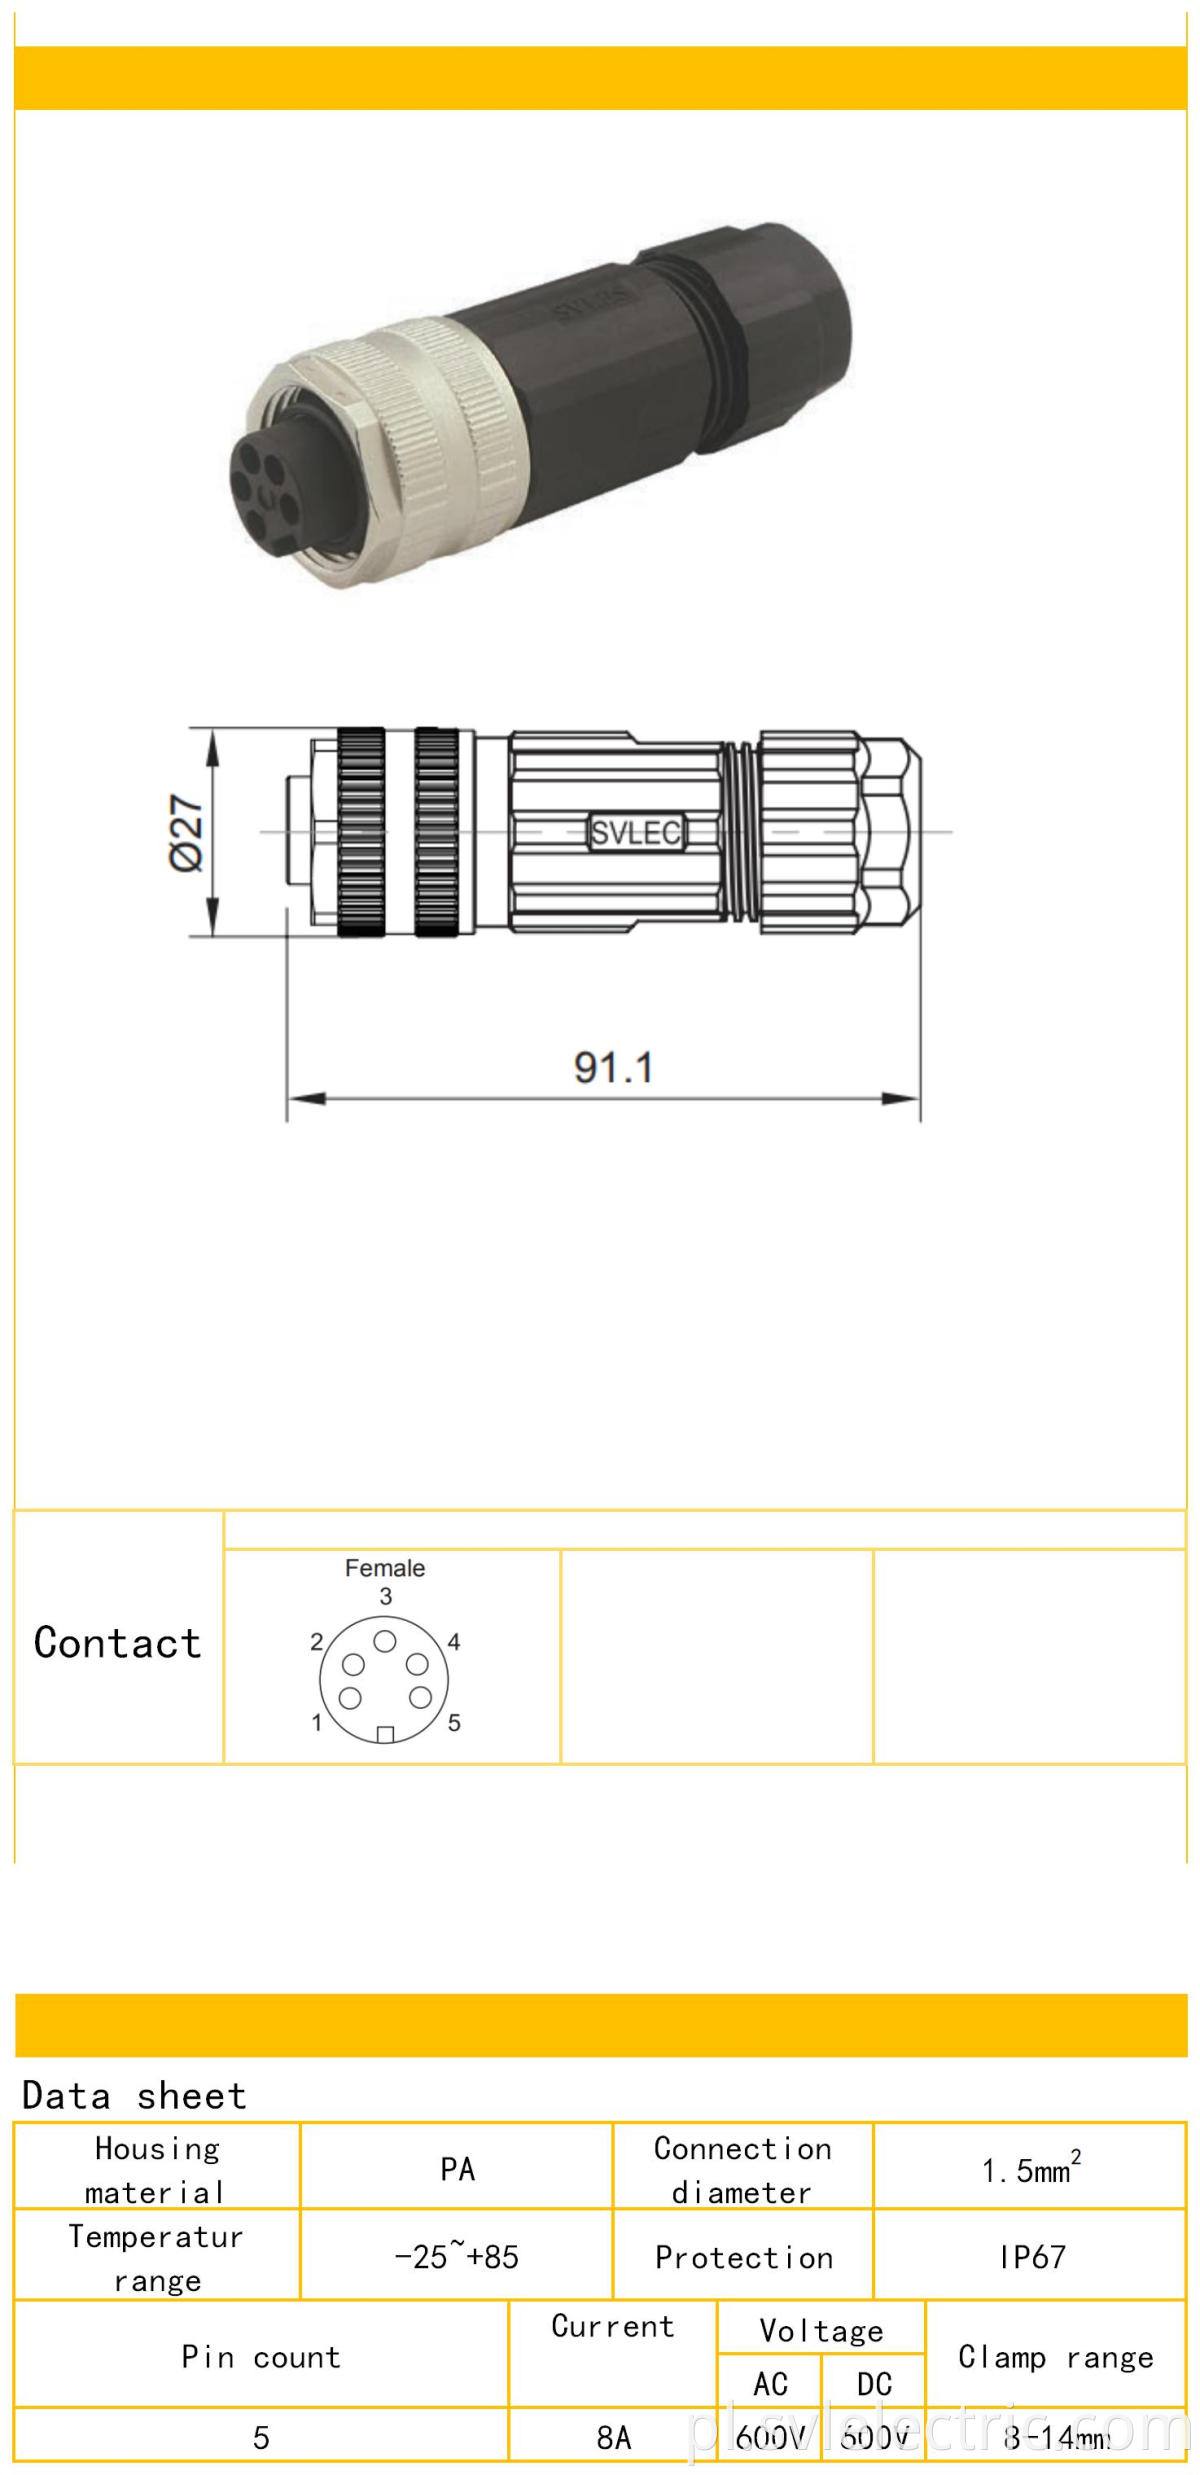 7/8" female connector